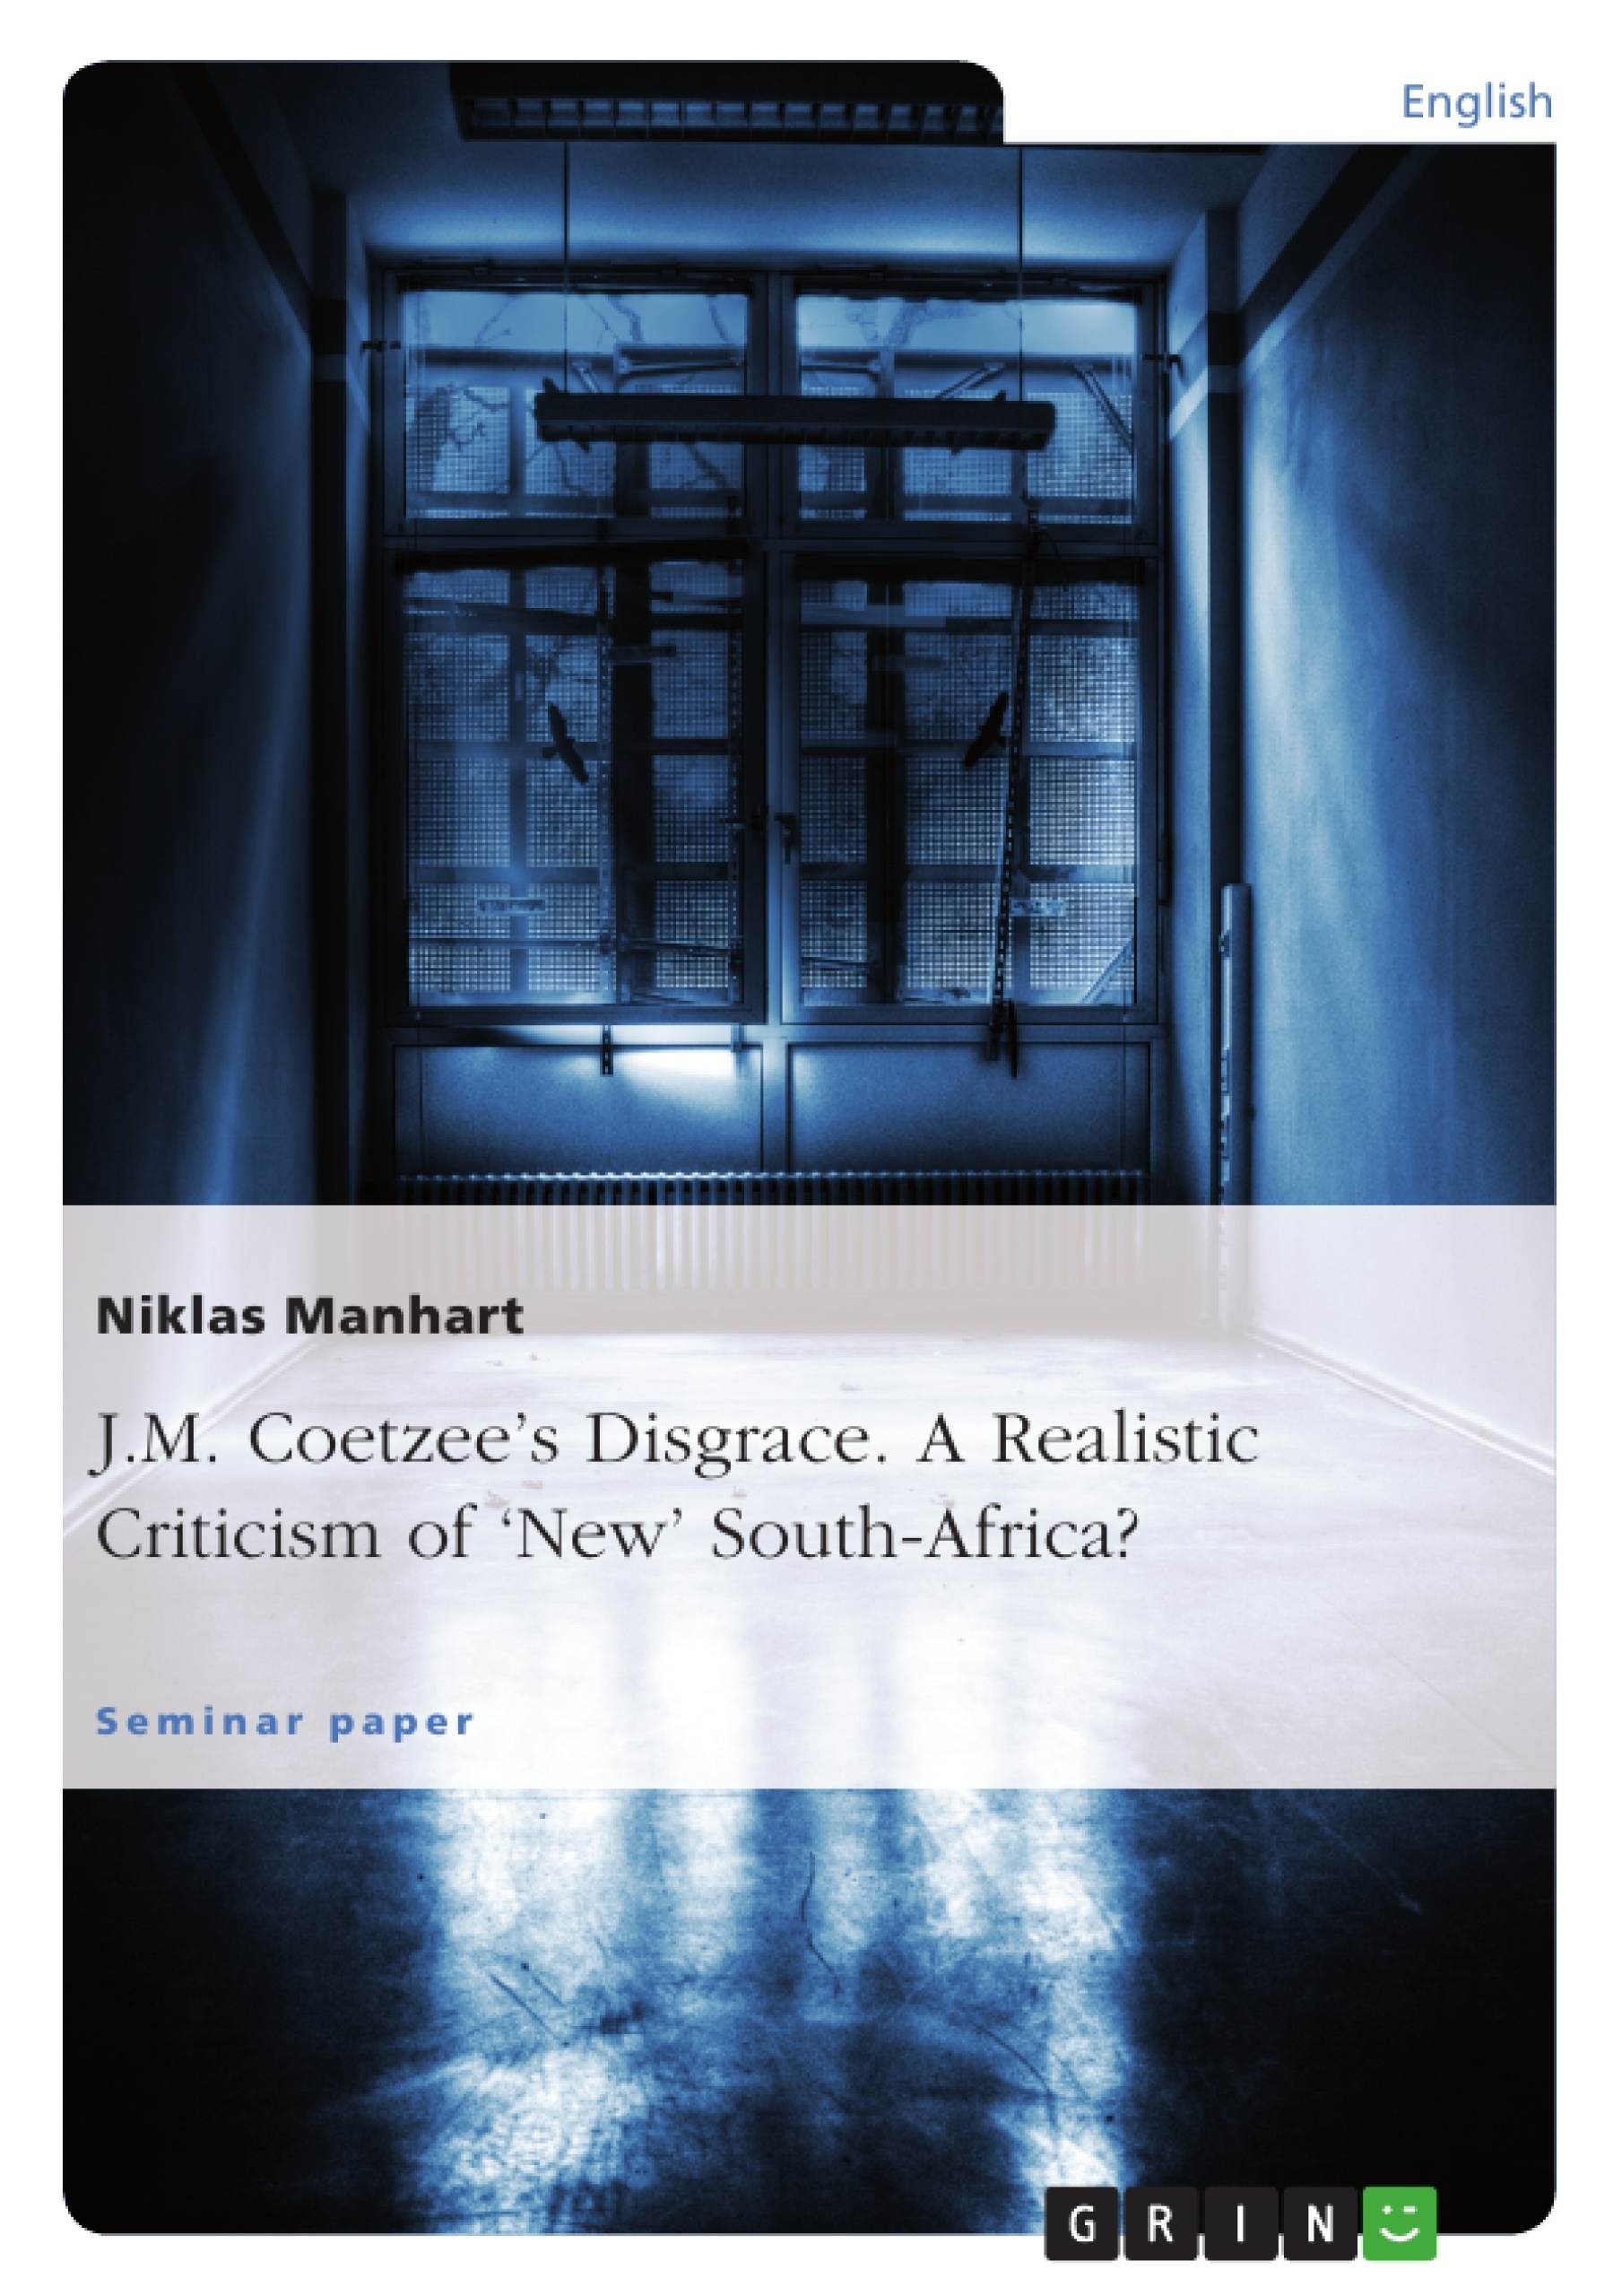 Título: J.M. Coetzee’s Disgrace. A Realistic Criticism of ‘New’ South-Africa?